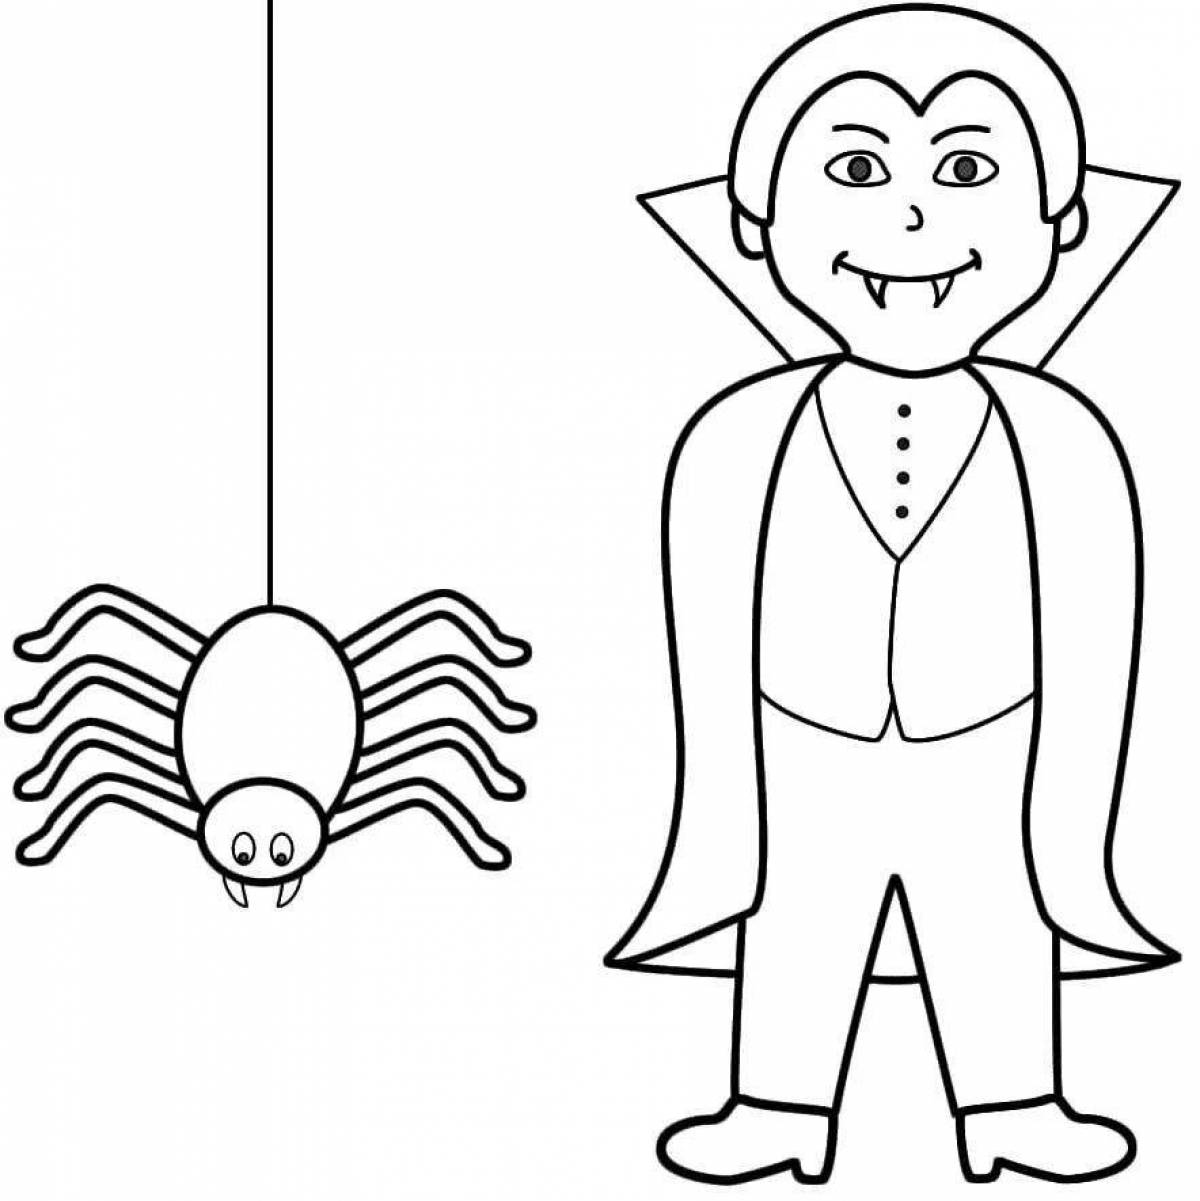 Chilling vampire coloring page for kids